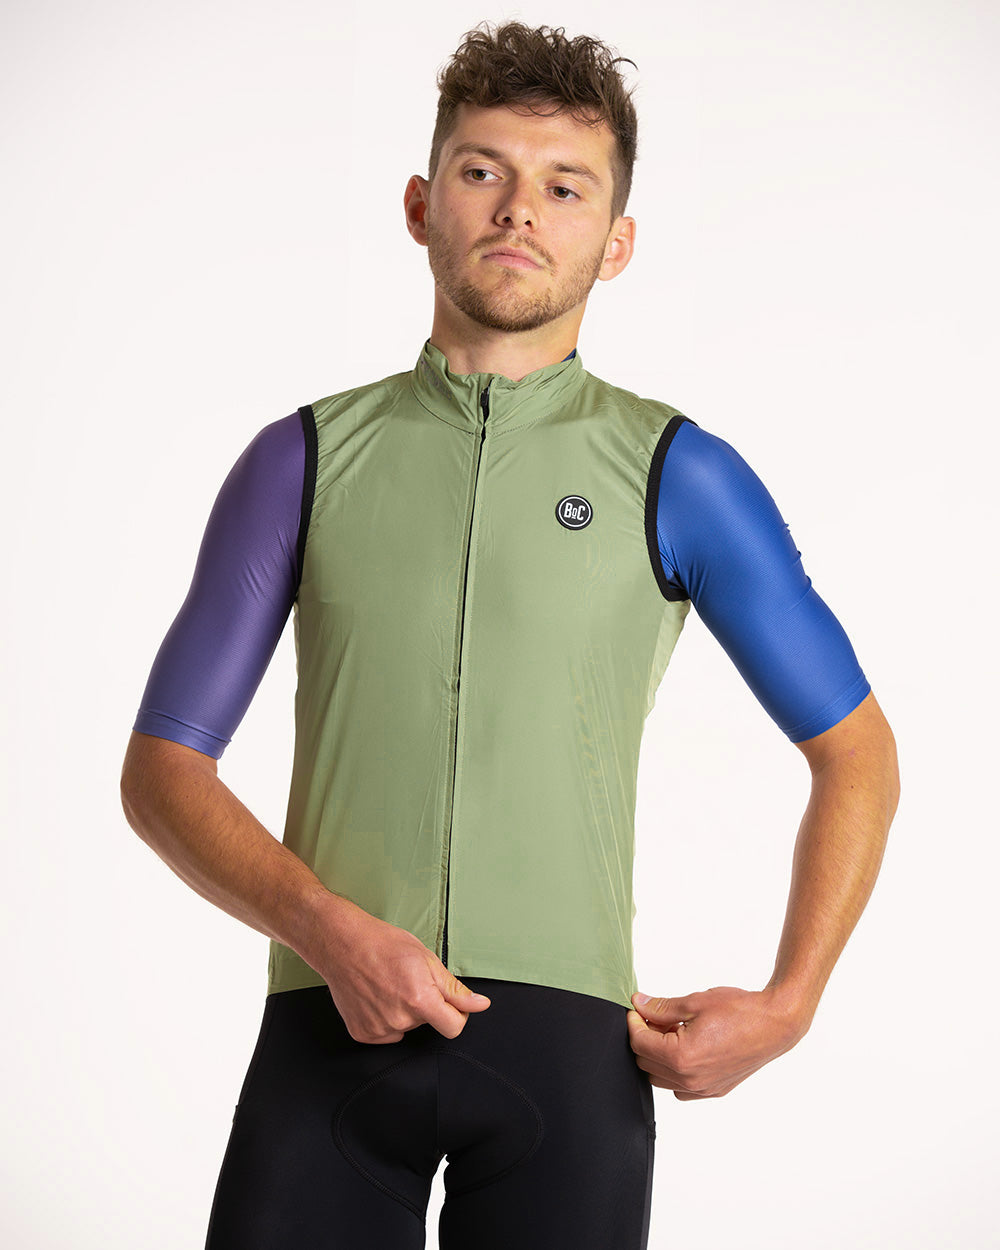 The X-Lite Wind Gilet - Olive